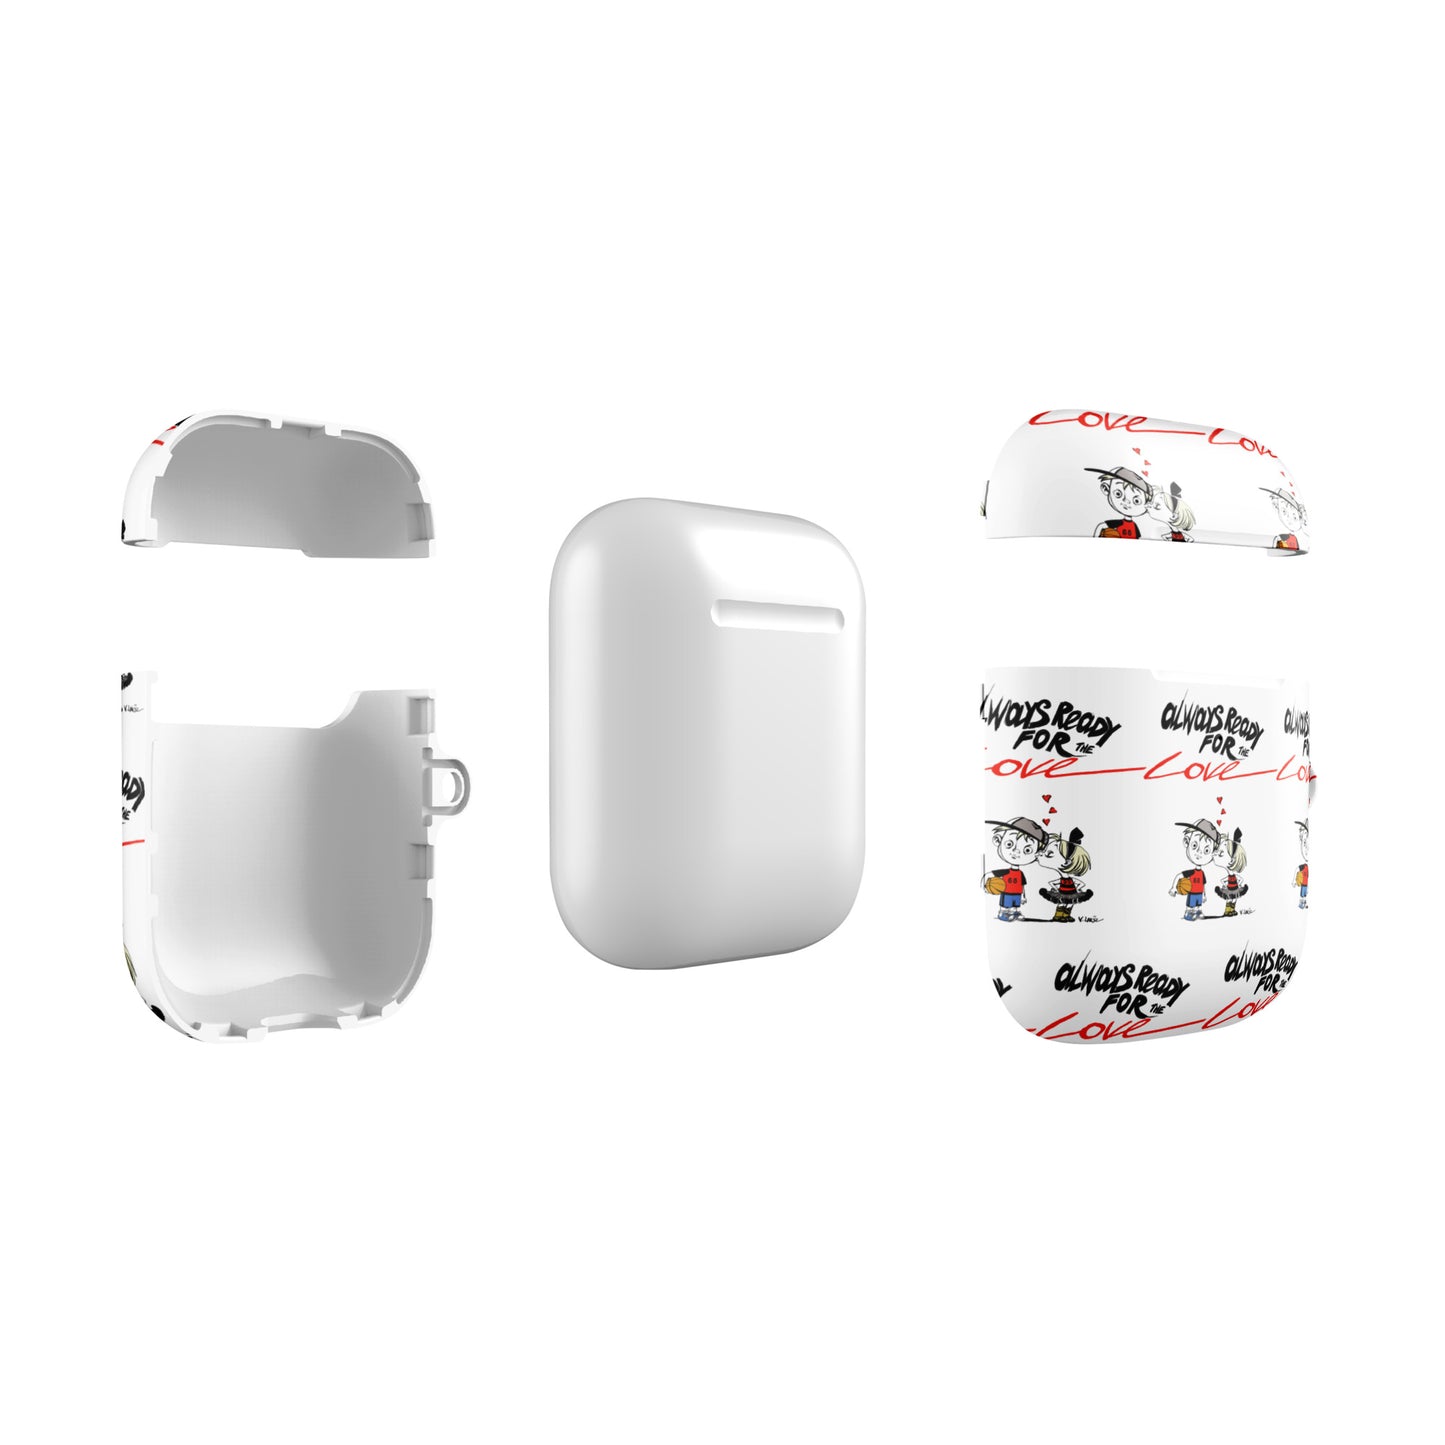 Ghetto LOVE Case for AirPods® designed by Lakshe